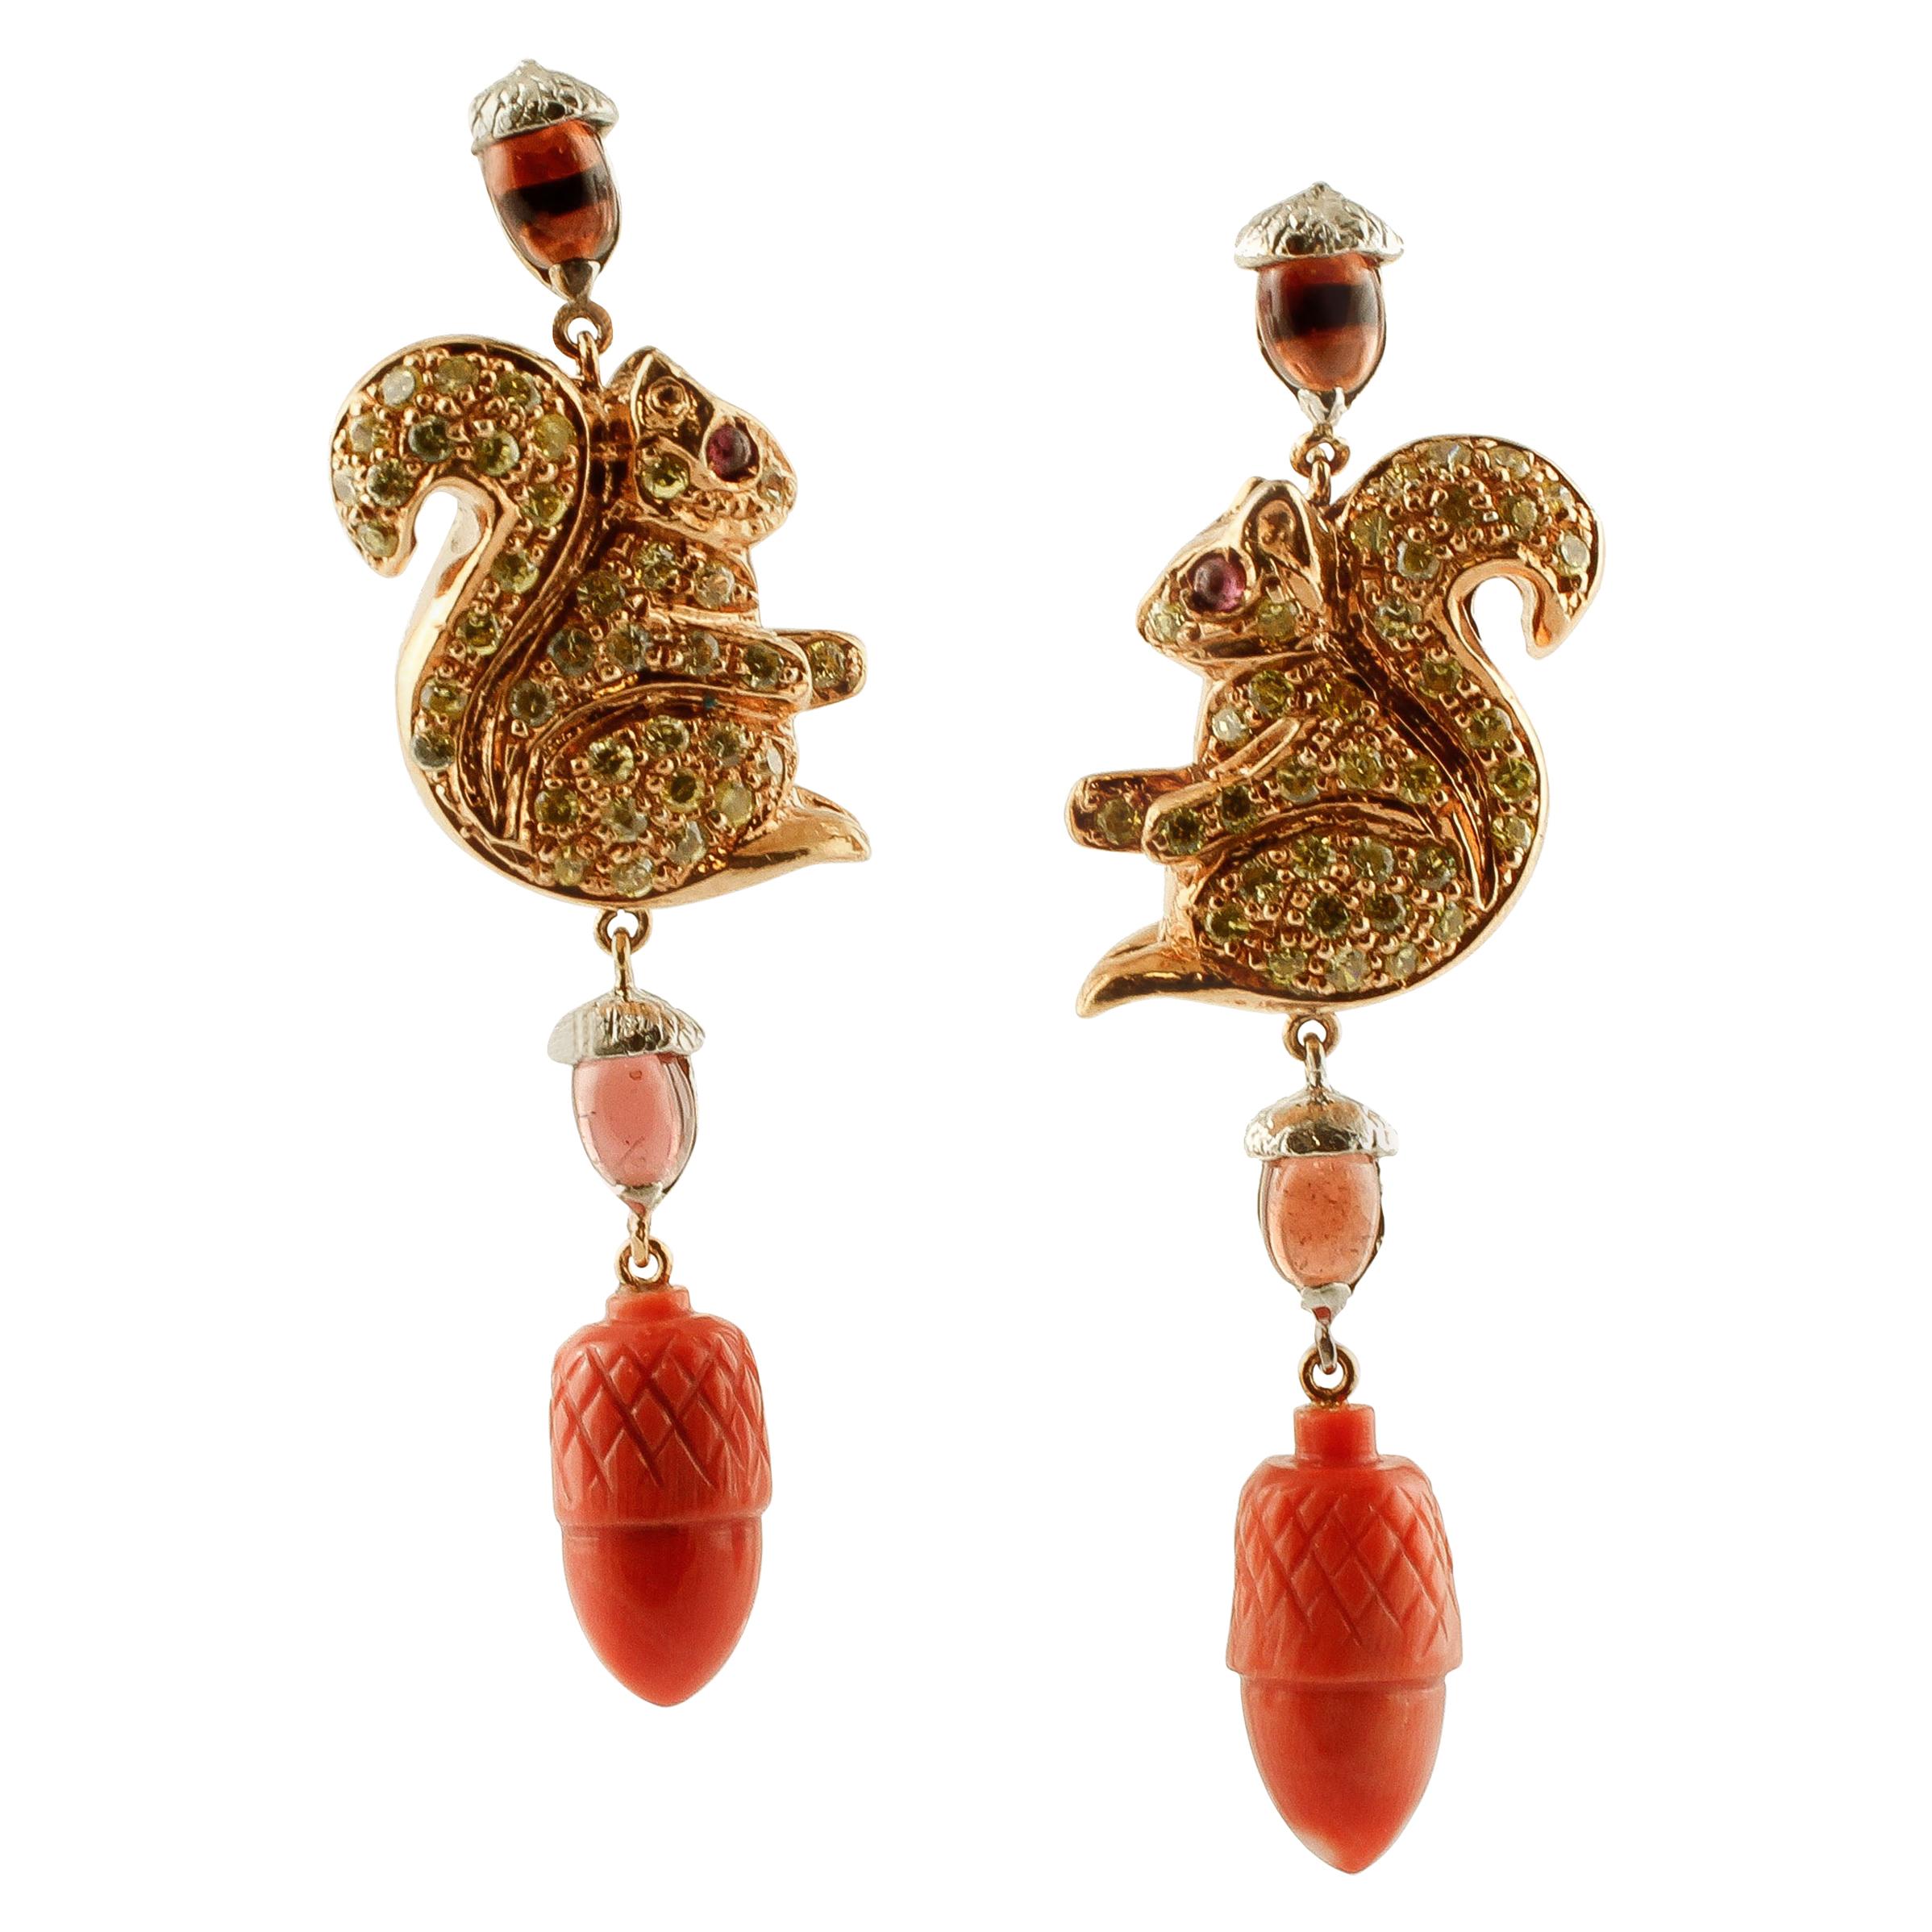 Garnets, Zirconia, Coral, Yellow Gold, Silver, Squirrel Earrings